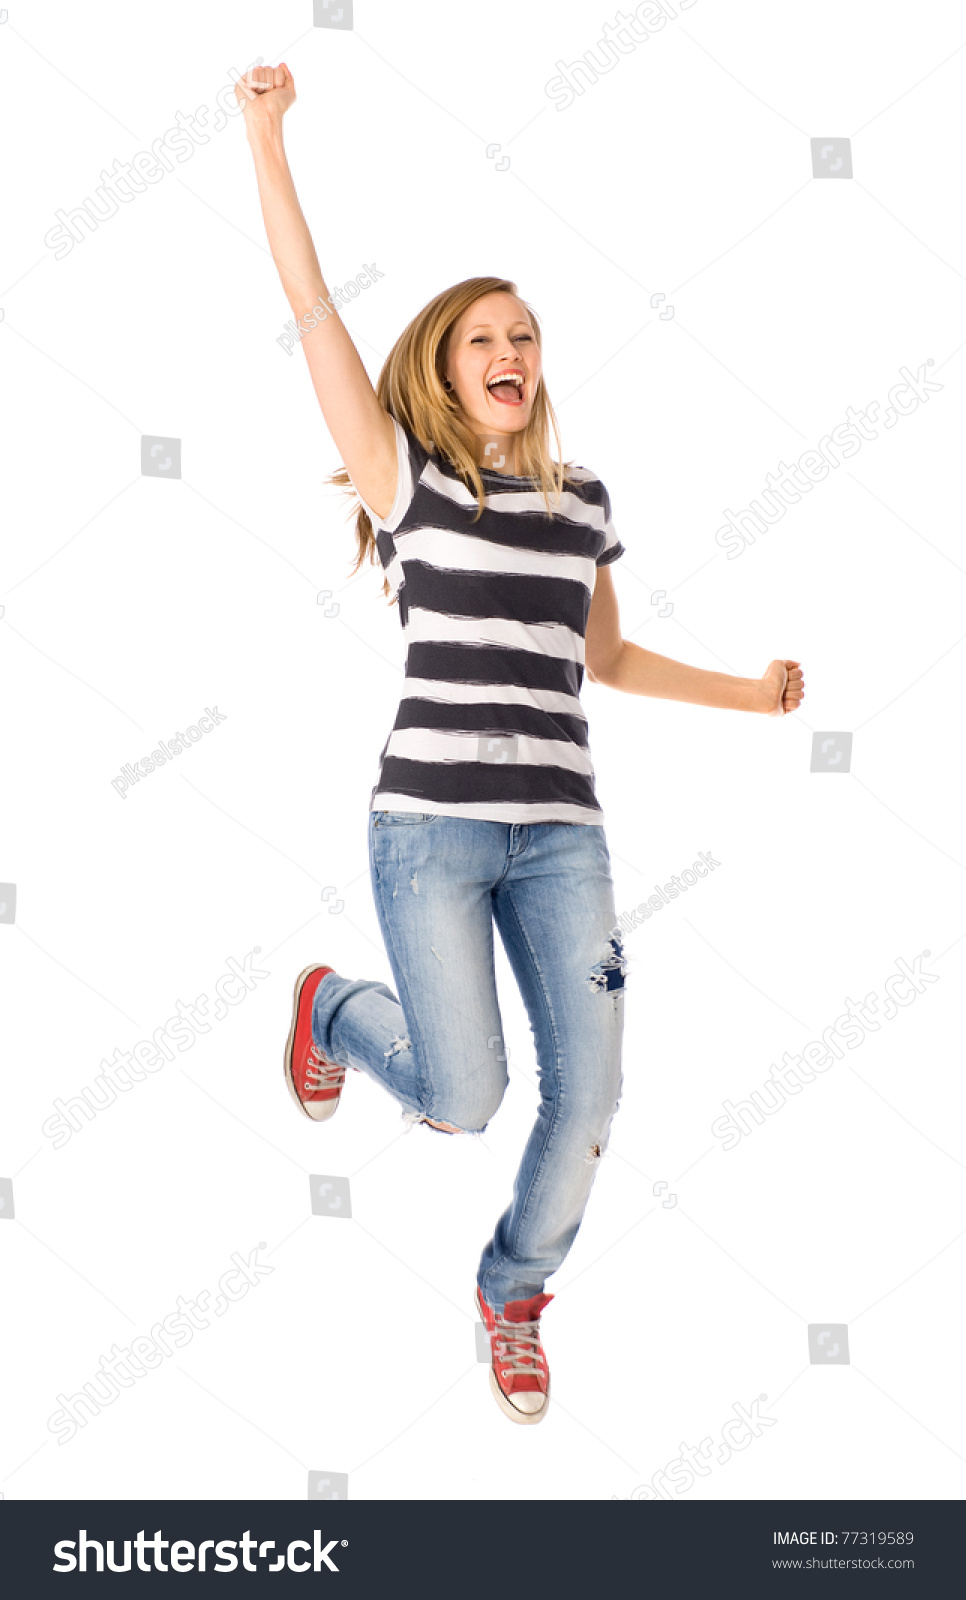 clipart woman jumping for joy - photo #49